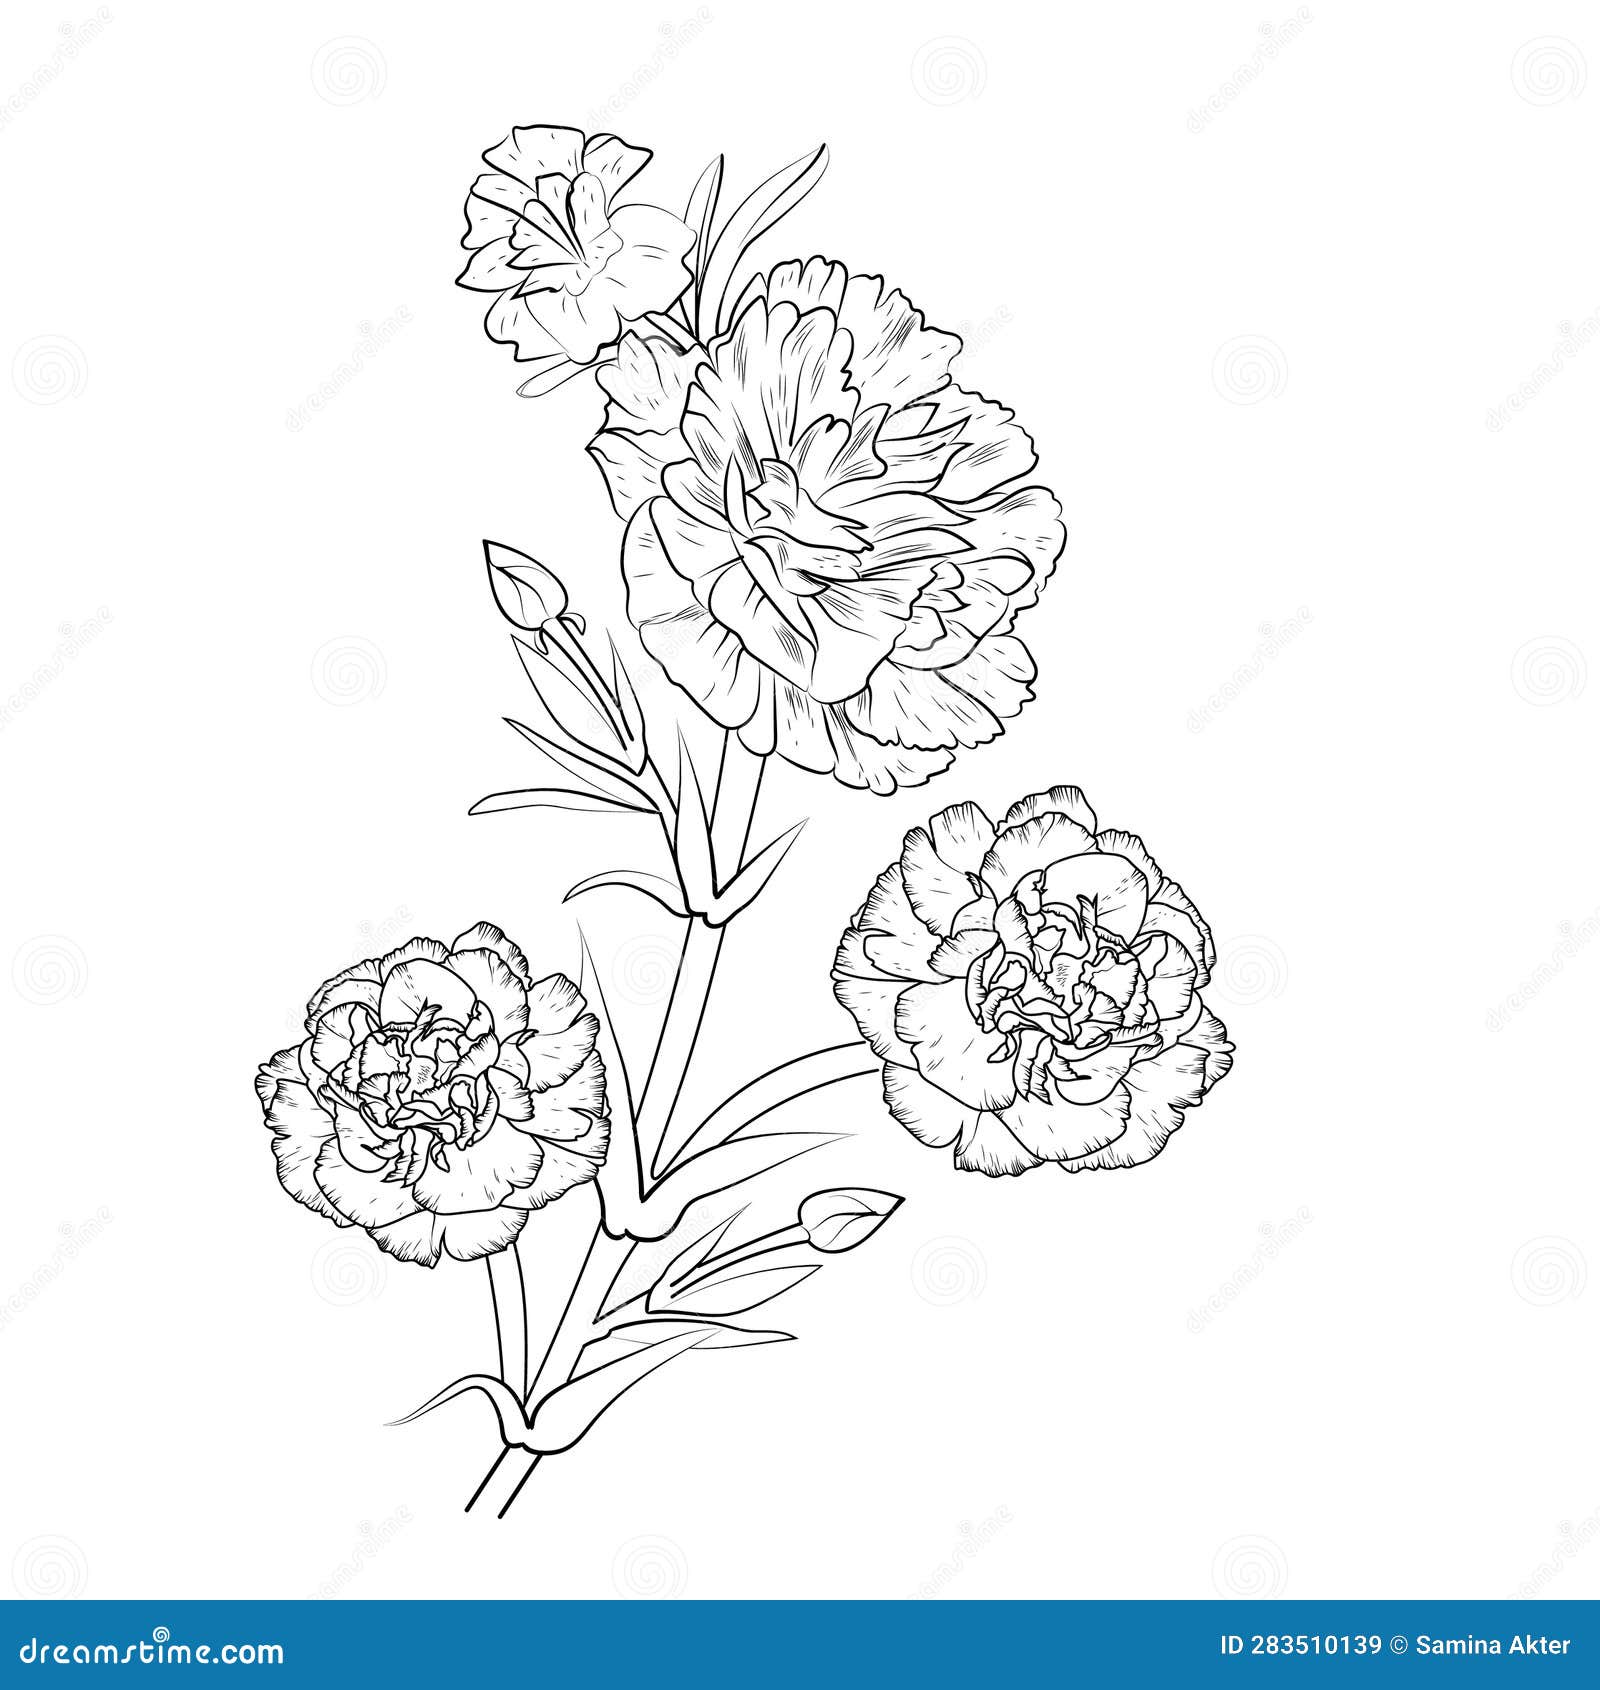 Realistic Carnation Flower Coloring Pages, Carnation Flower Tattoo ...